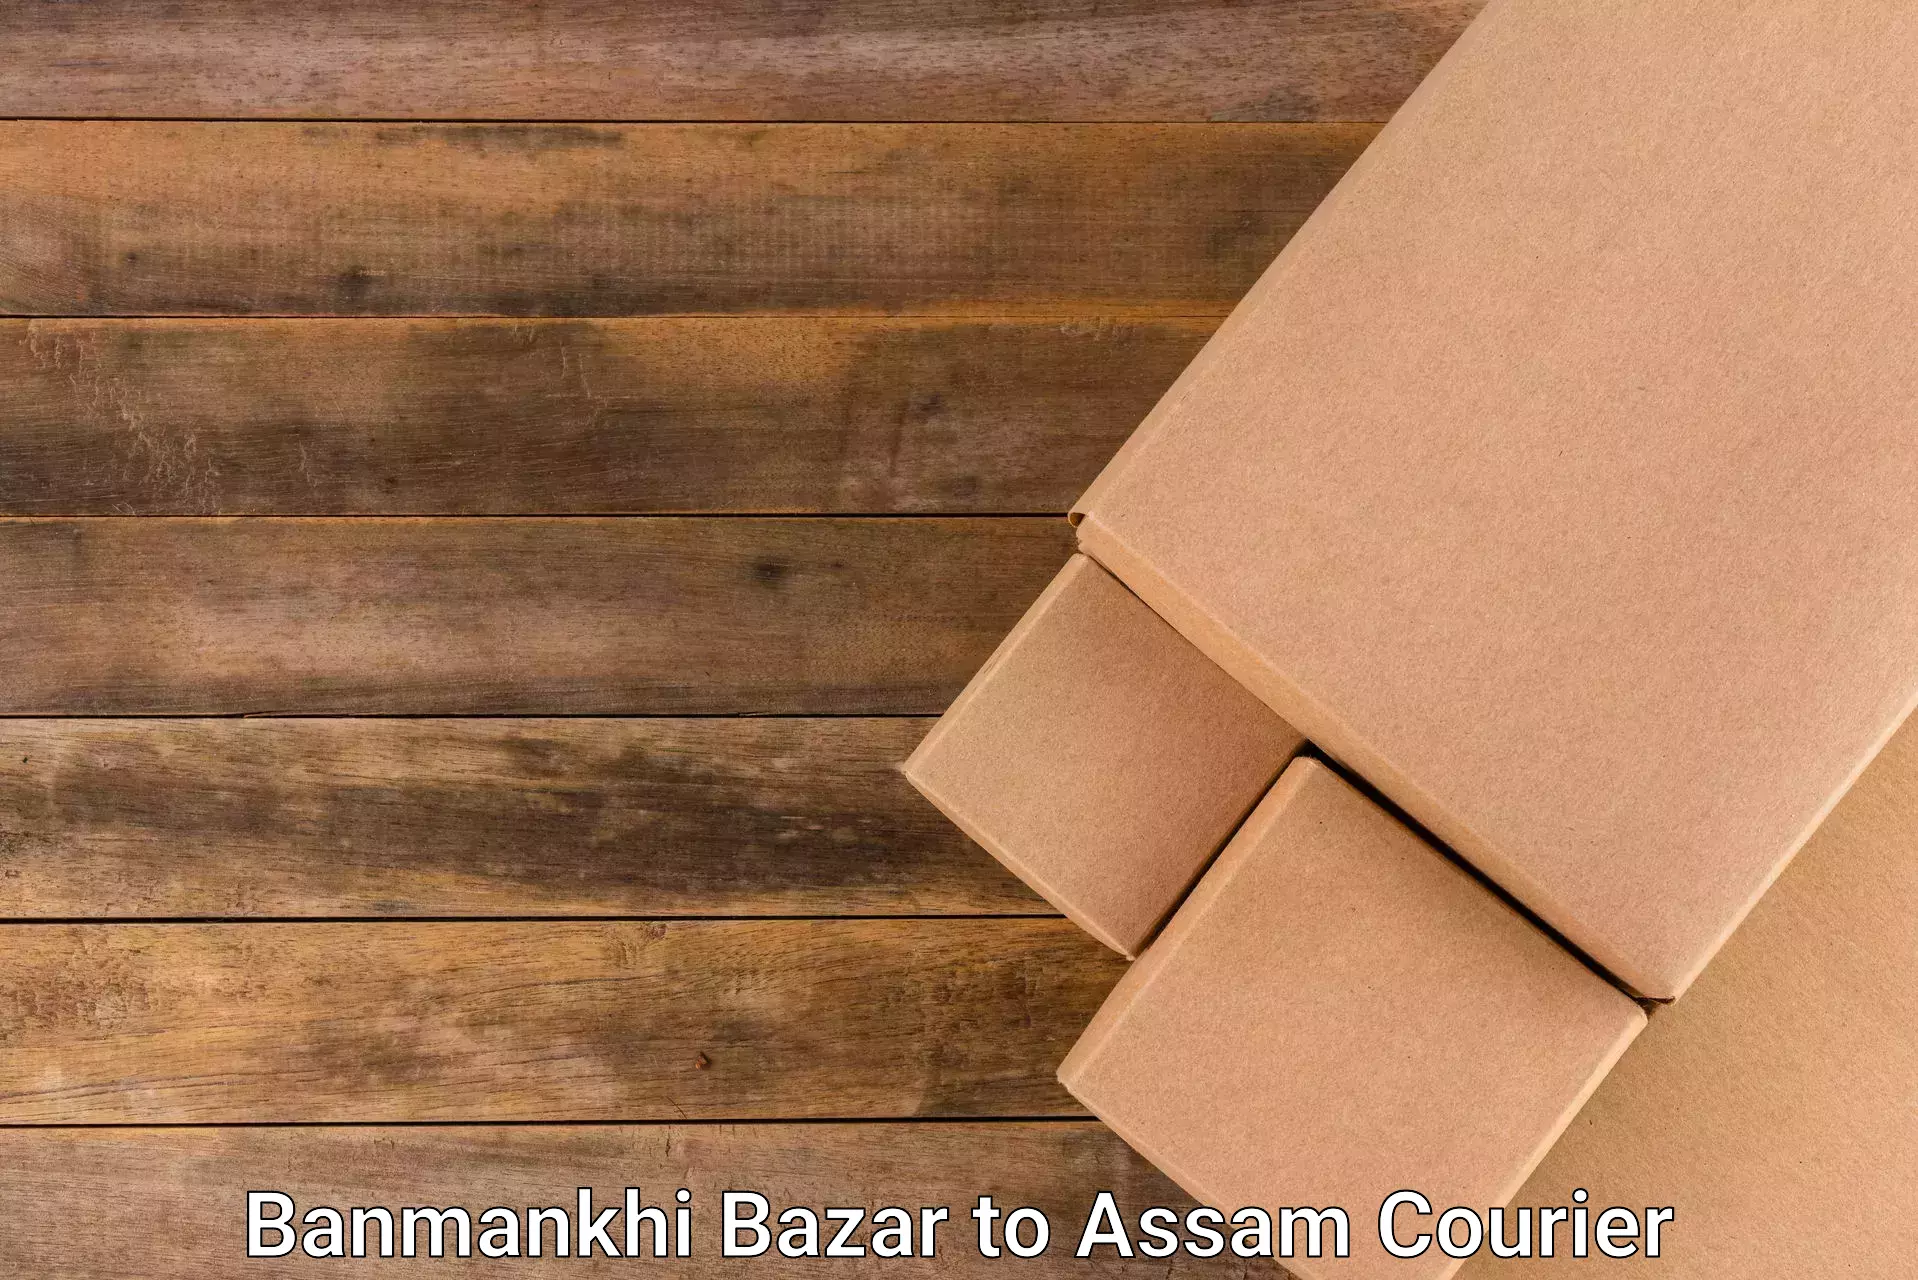 Cost-effective courier options Banmankhi Bazar to Assam